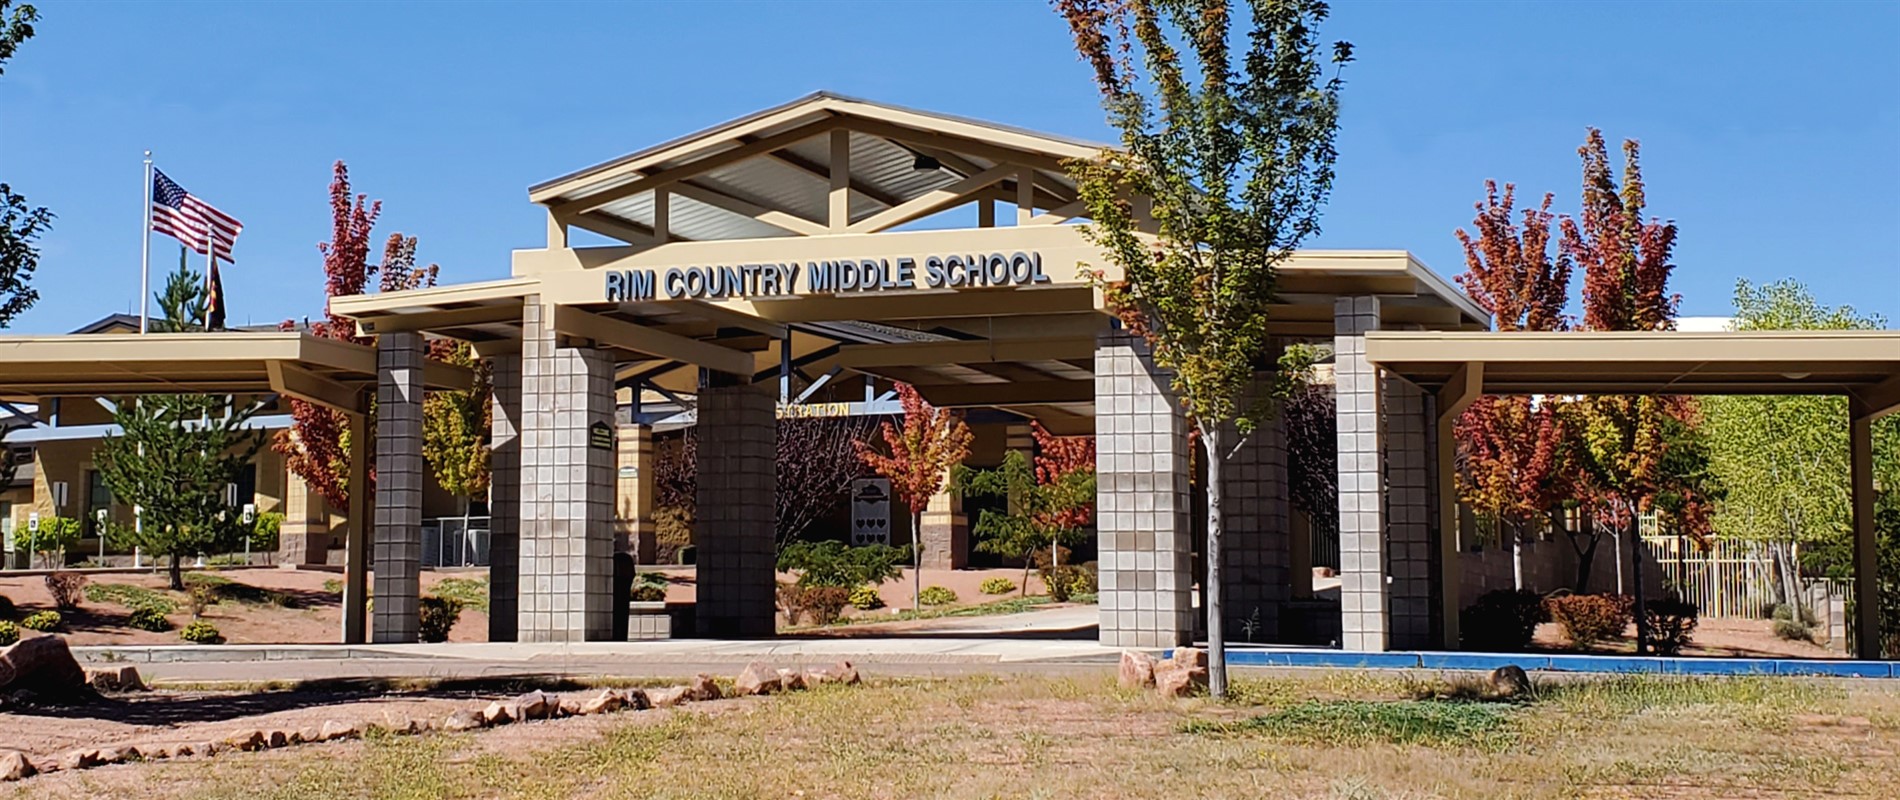 Home - Rim Country Middle School